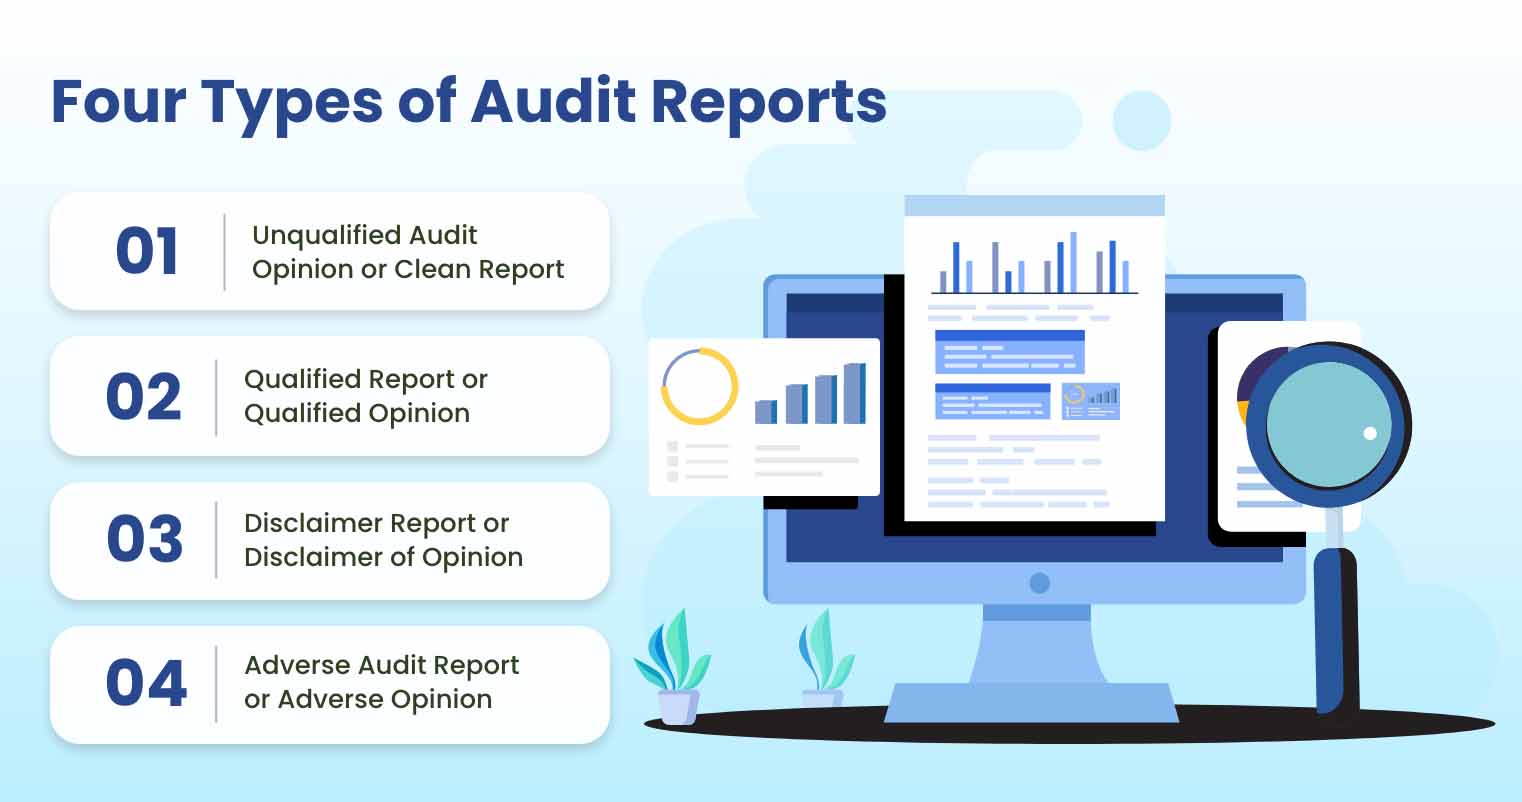 What are the 4 types of audit reports?